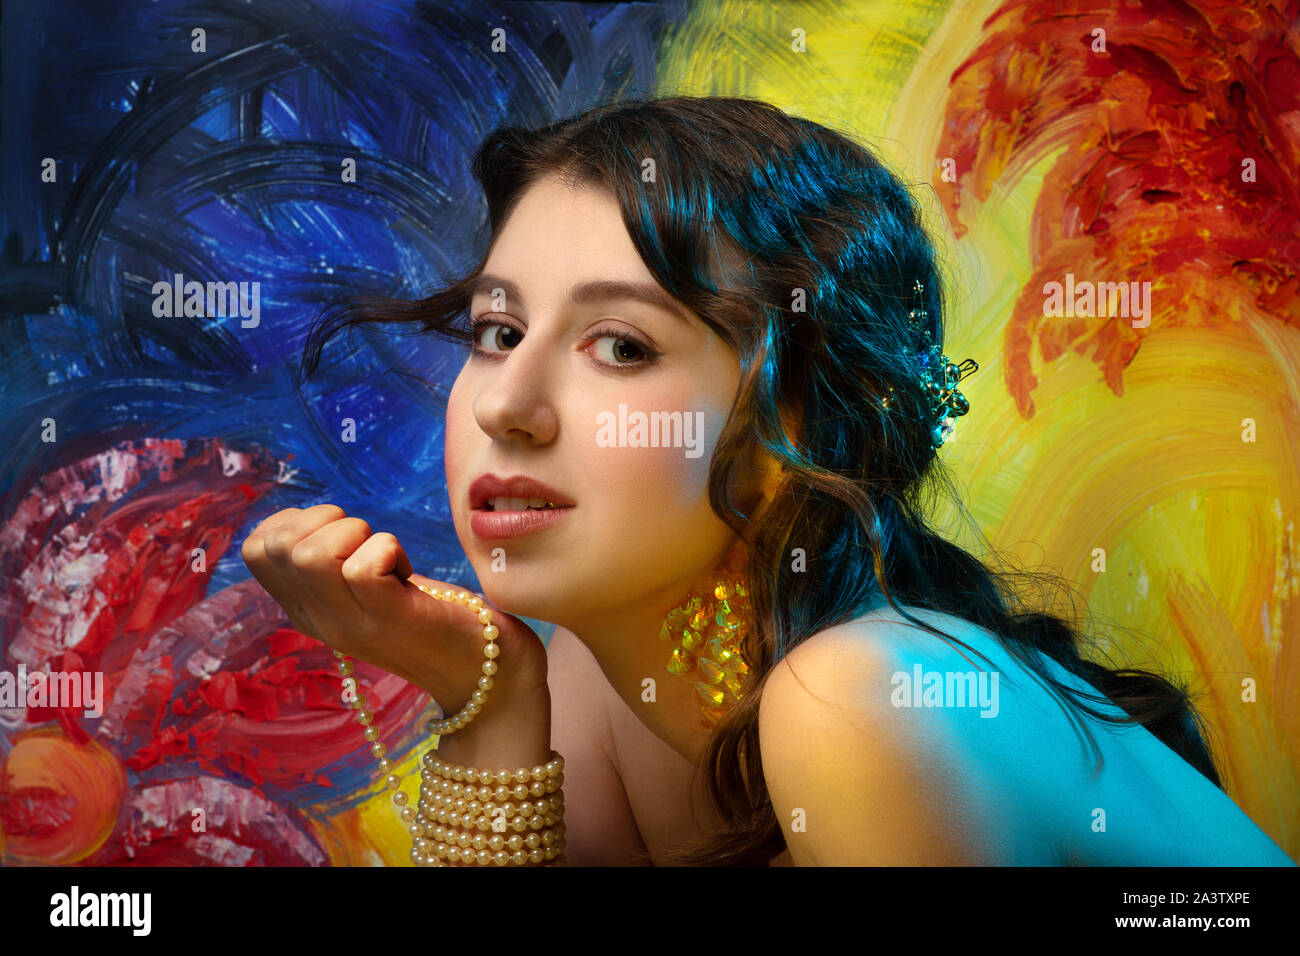 young woman with gypsy or mermaid makeup side view, looking at camera ...